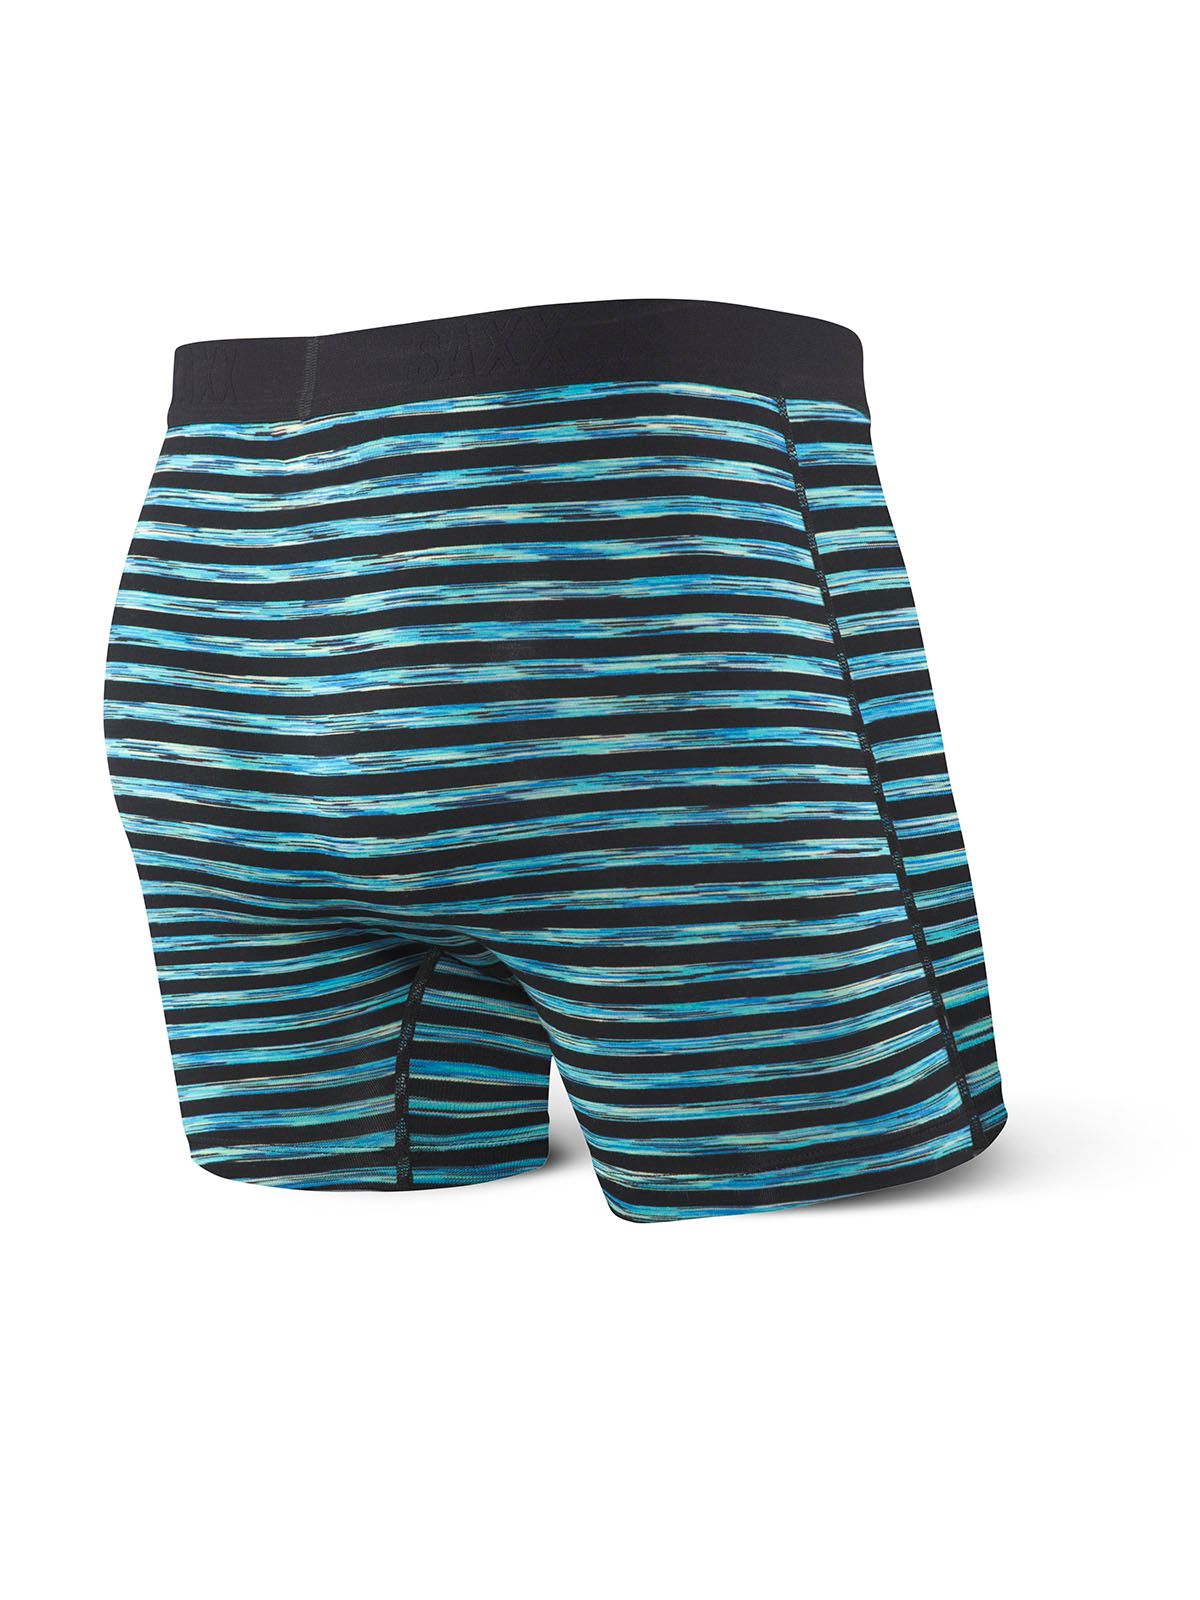 Vibe Boxer Brief - Tailgaters- Teal